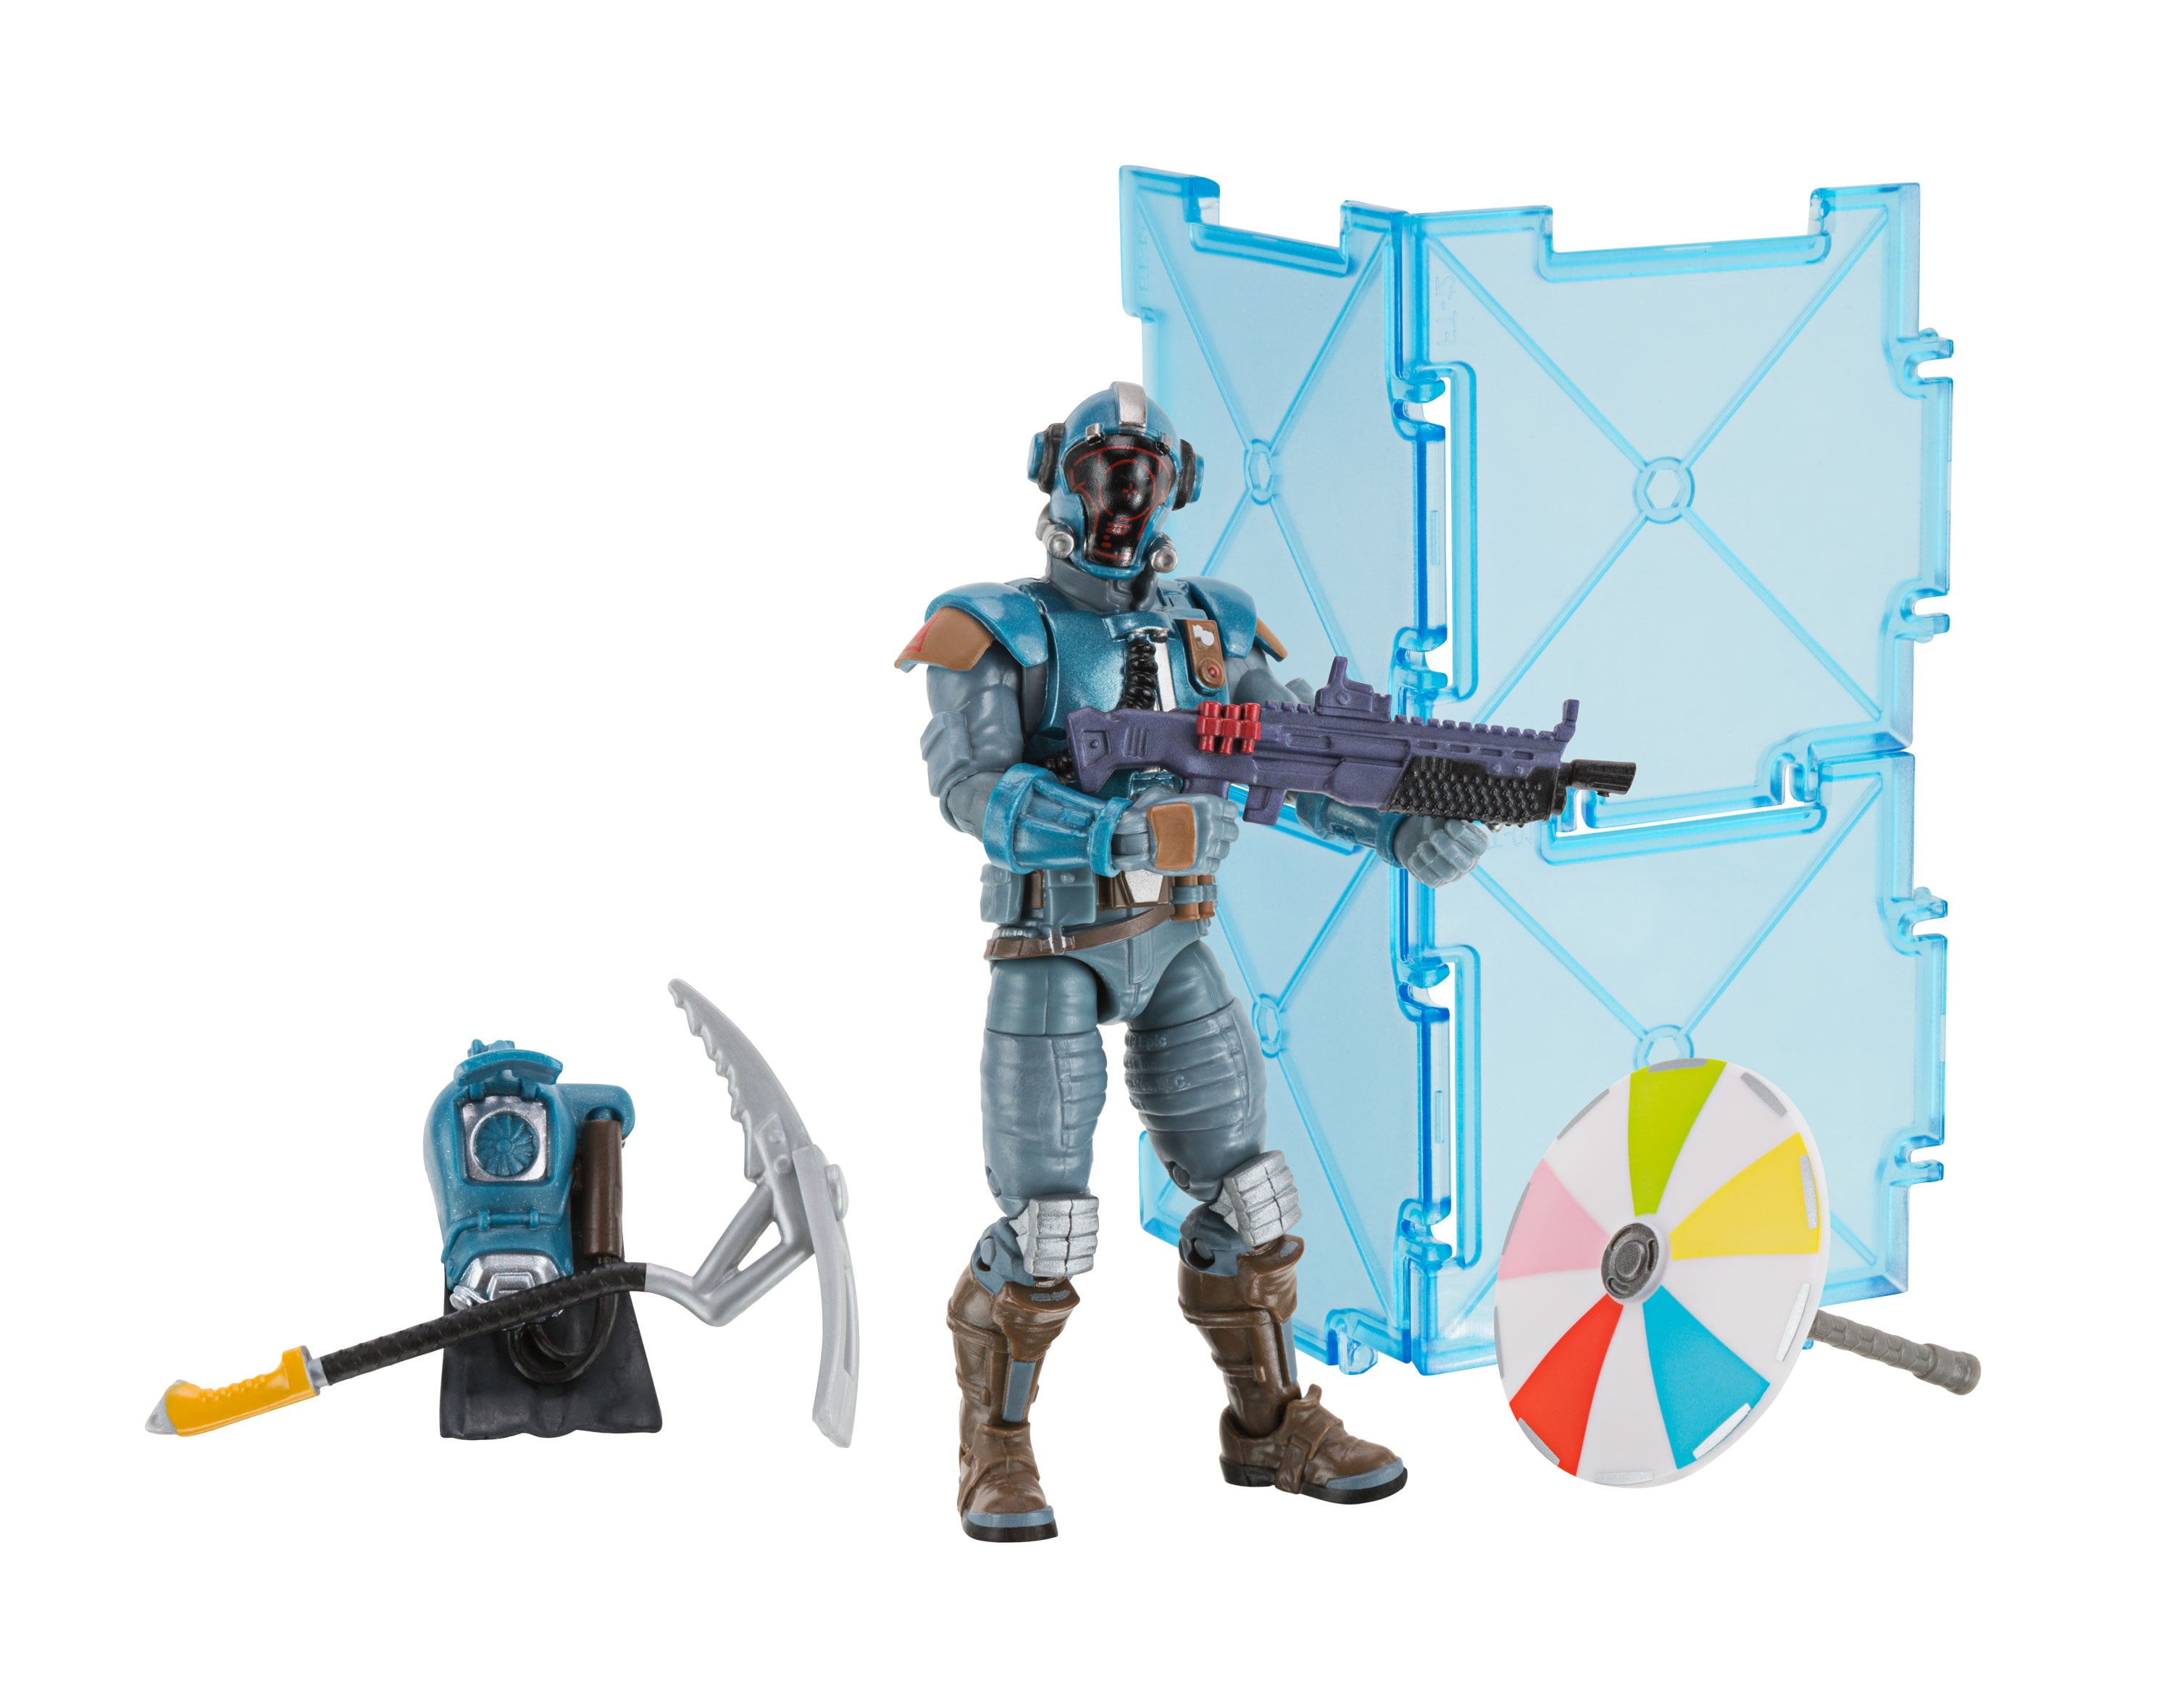 Jazwares Fortnite 4" Scratch Solo Mode Action Figure Core-pack Fnt0603 A8 for sale online 